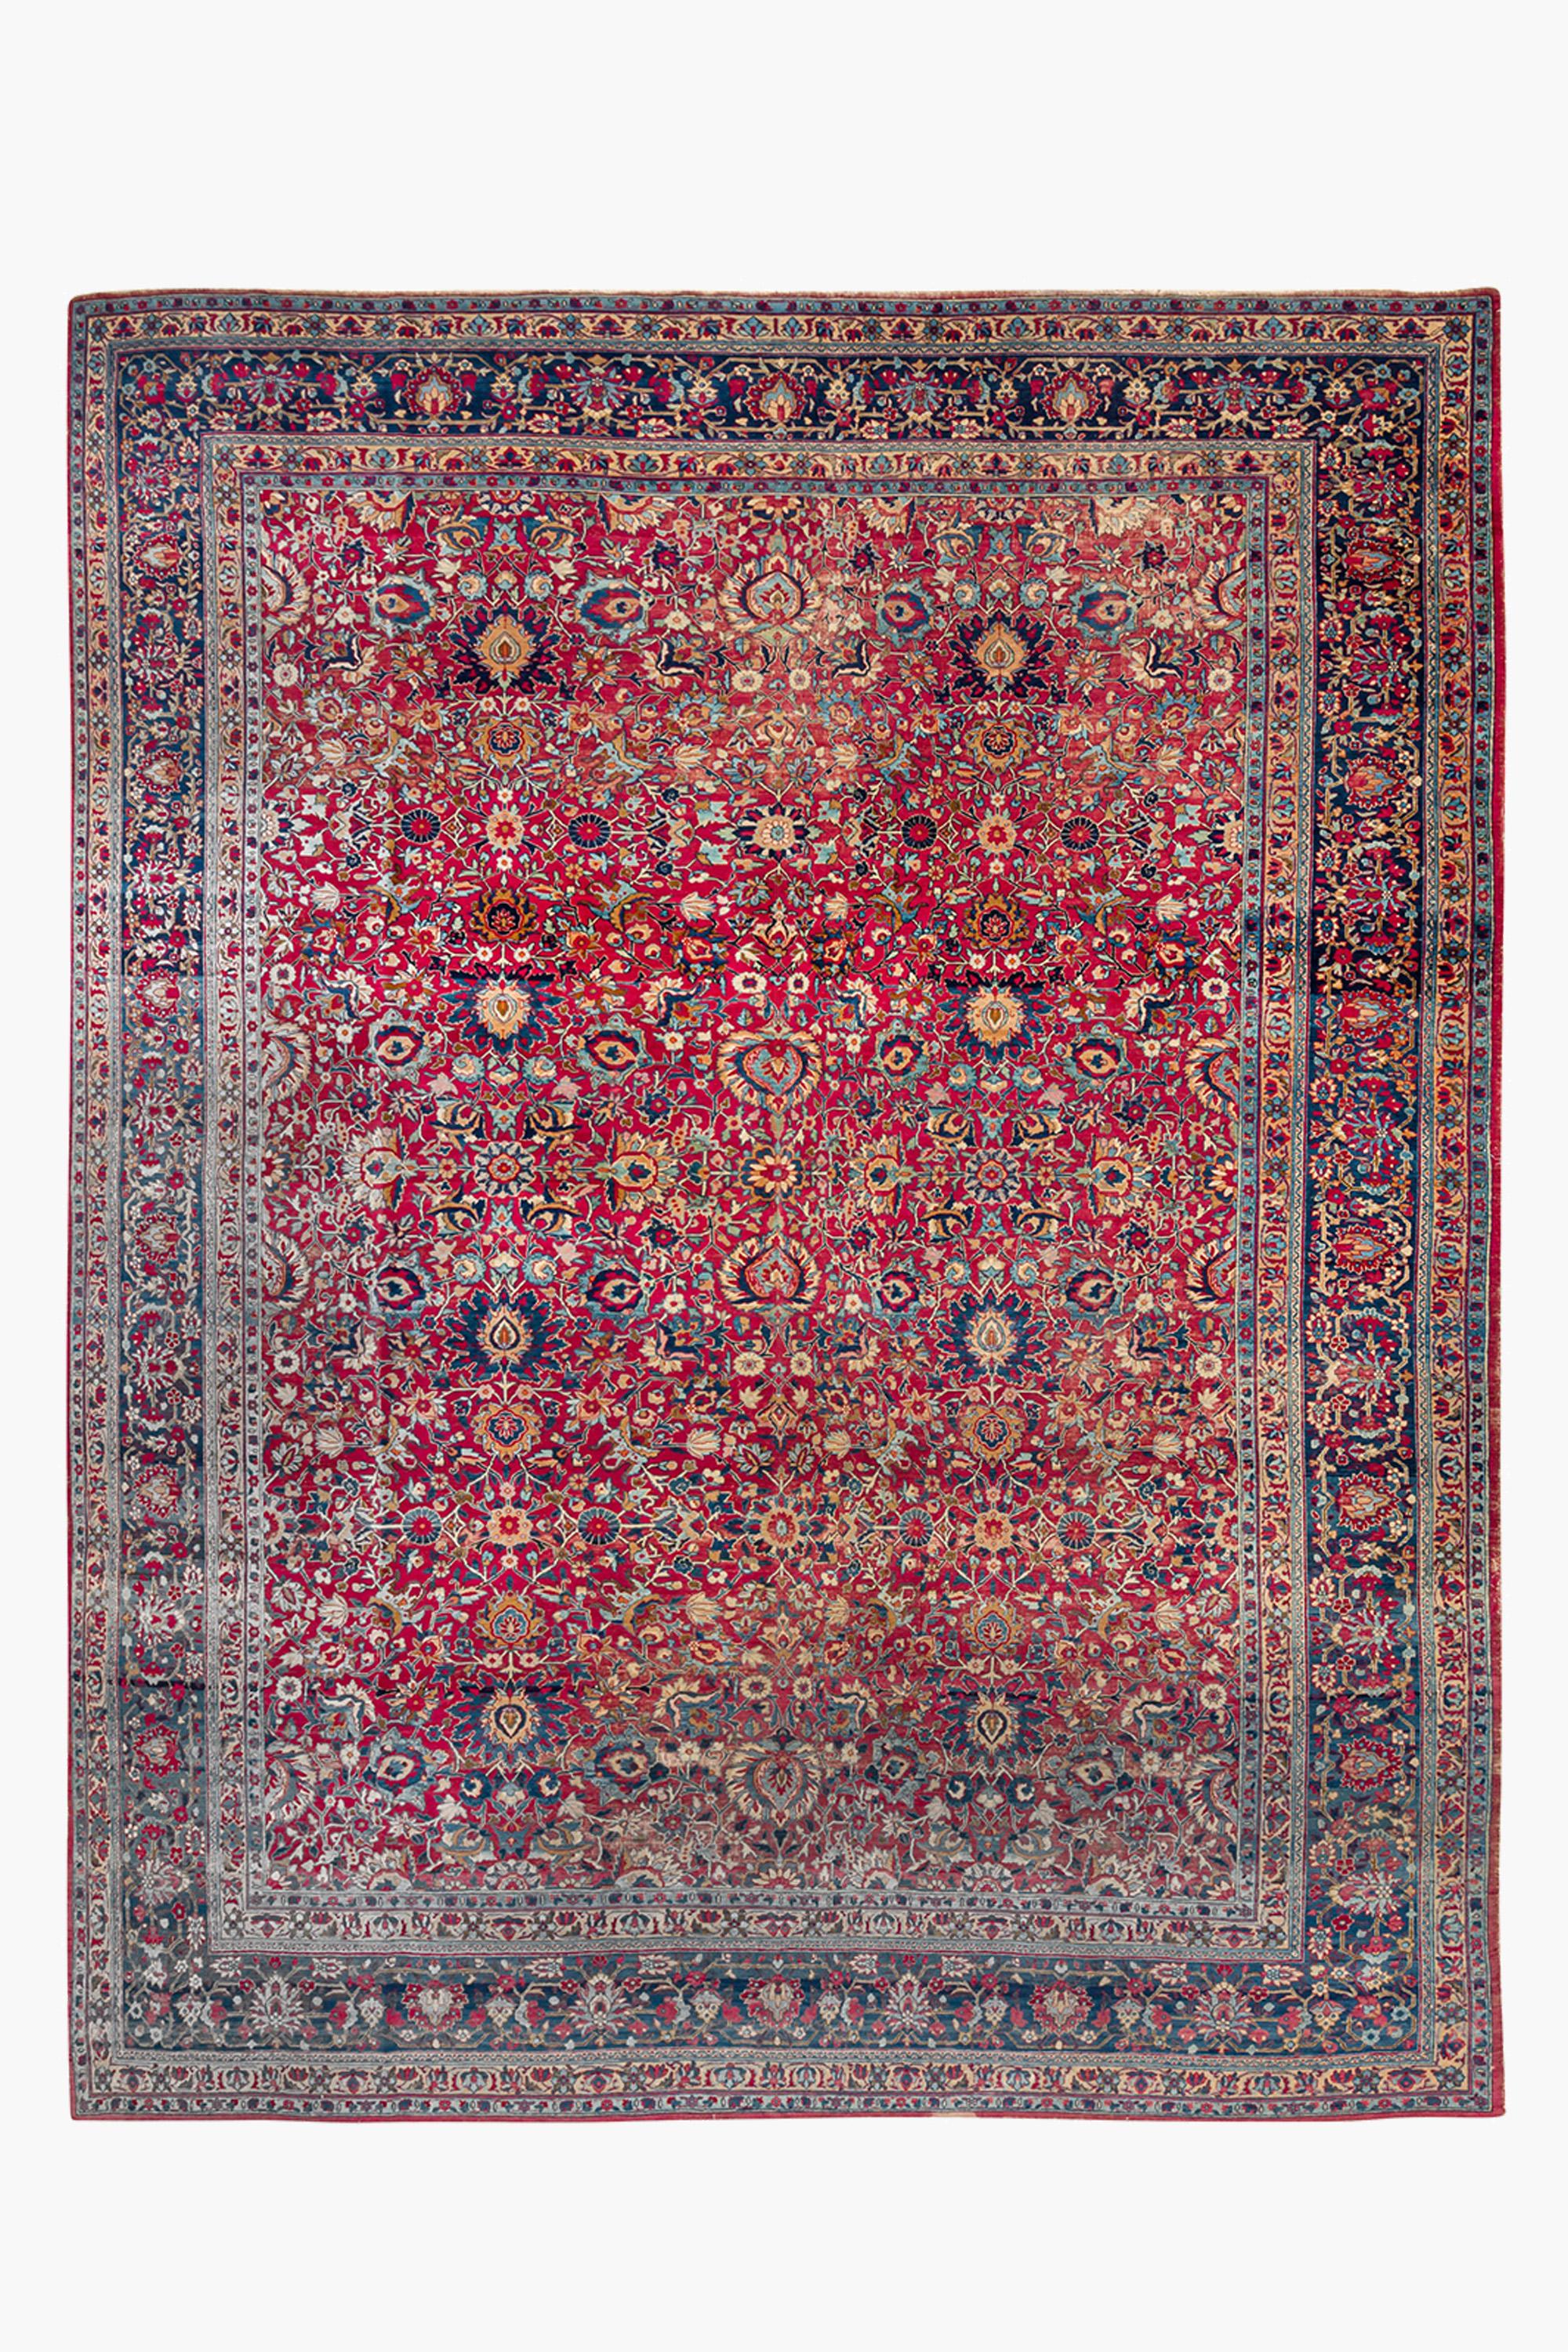 A lovely example of an antique Tabriz carpet with a beautifully drawn overall design of bold polychrome palmettes, flowers and vines.

Condition: Good overall condition - an idea furnishing piece. Some localised wear to the pile, down to the knot